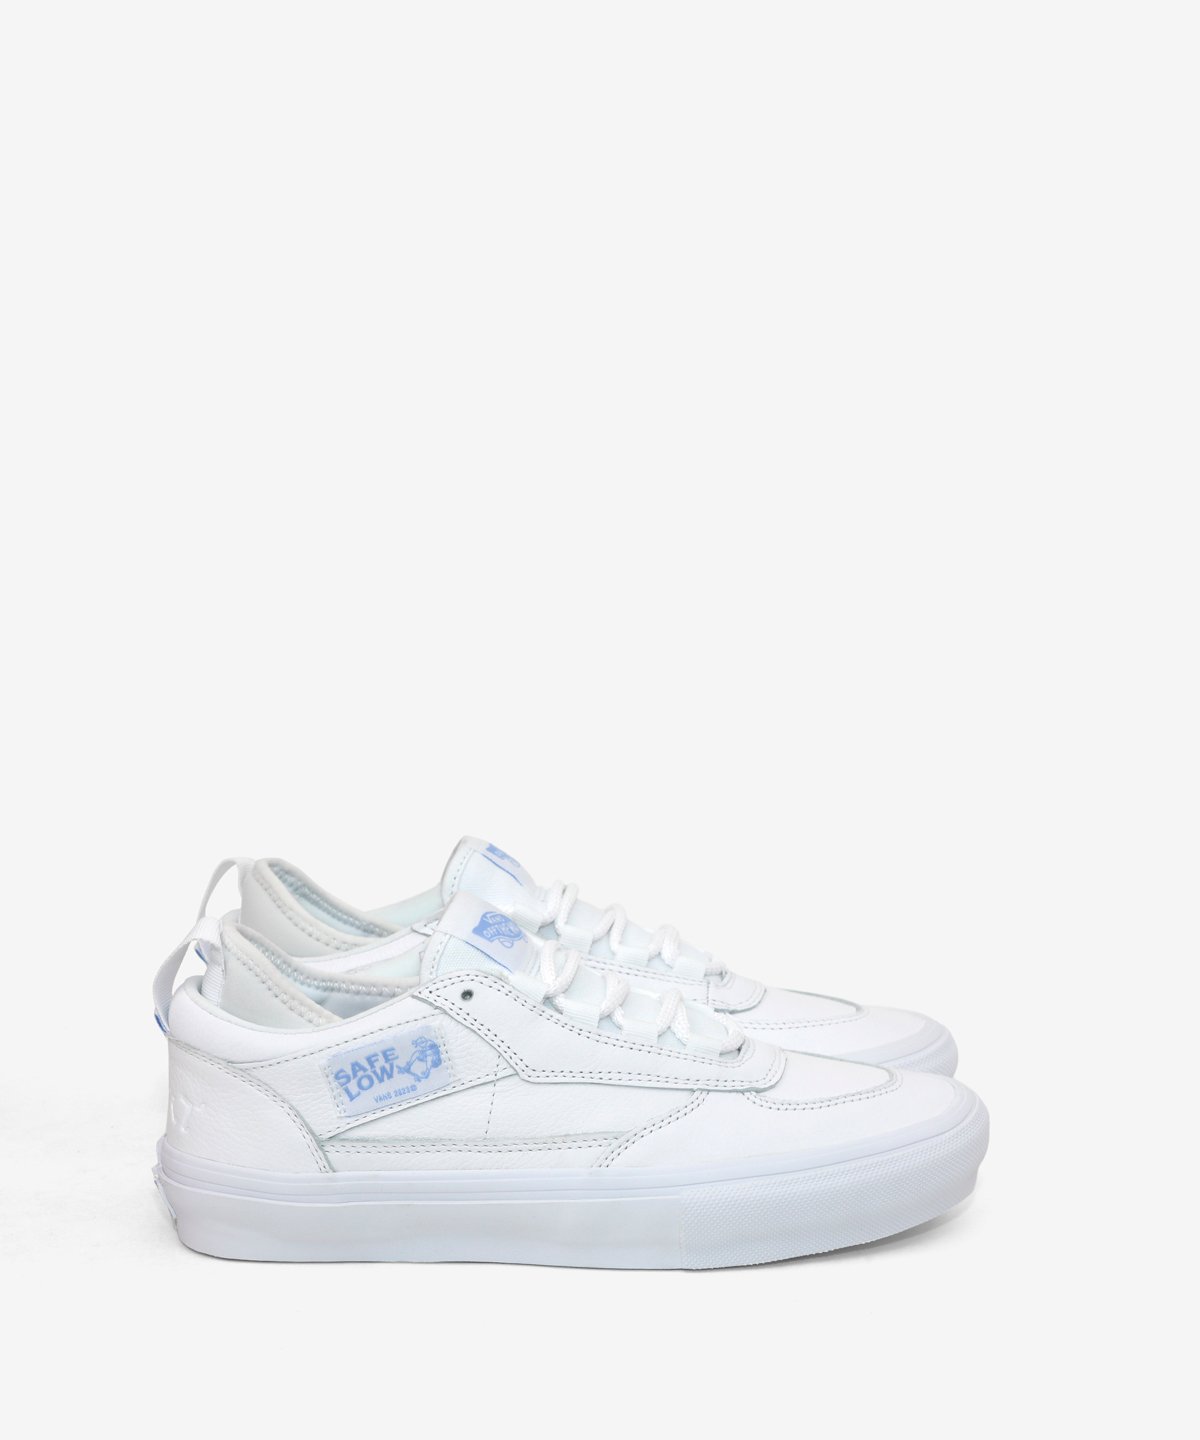 Image of VANS_SAFE LOW (RORY) :::WHITE LEATHER:::